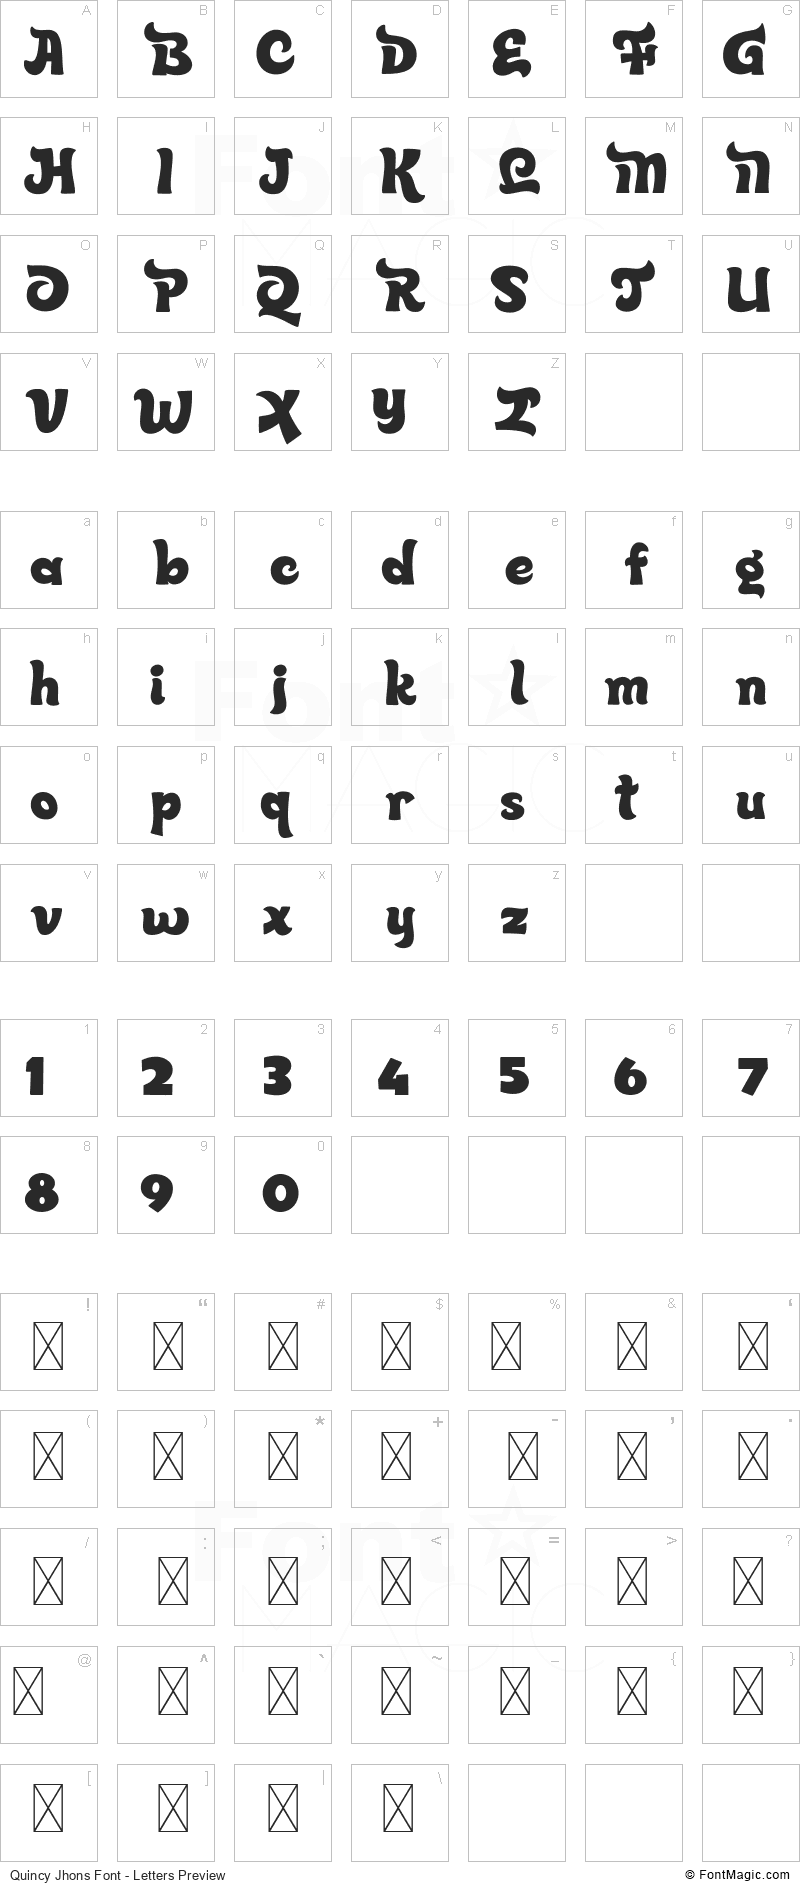 Quincy Jhons Font - All Latters Preview Chart